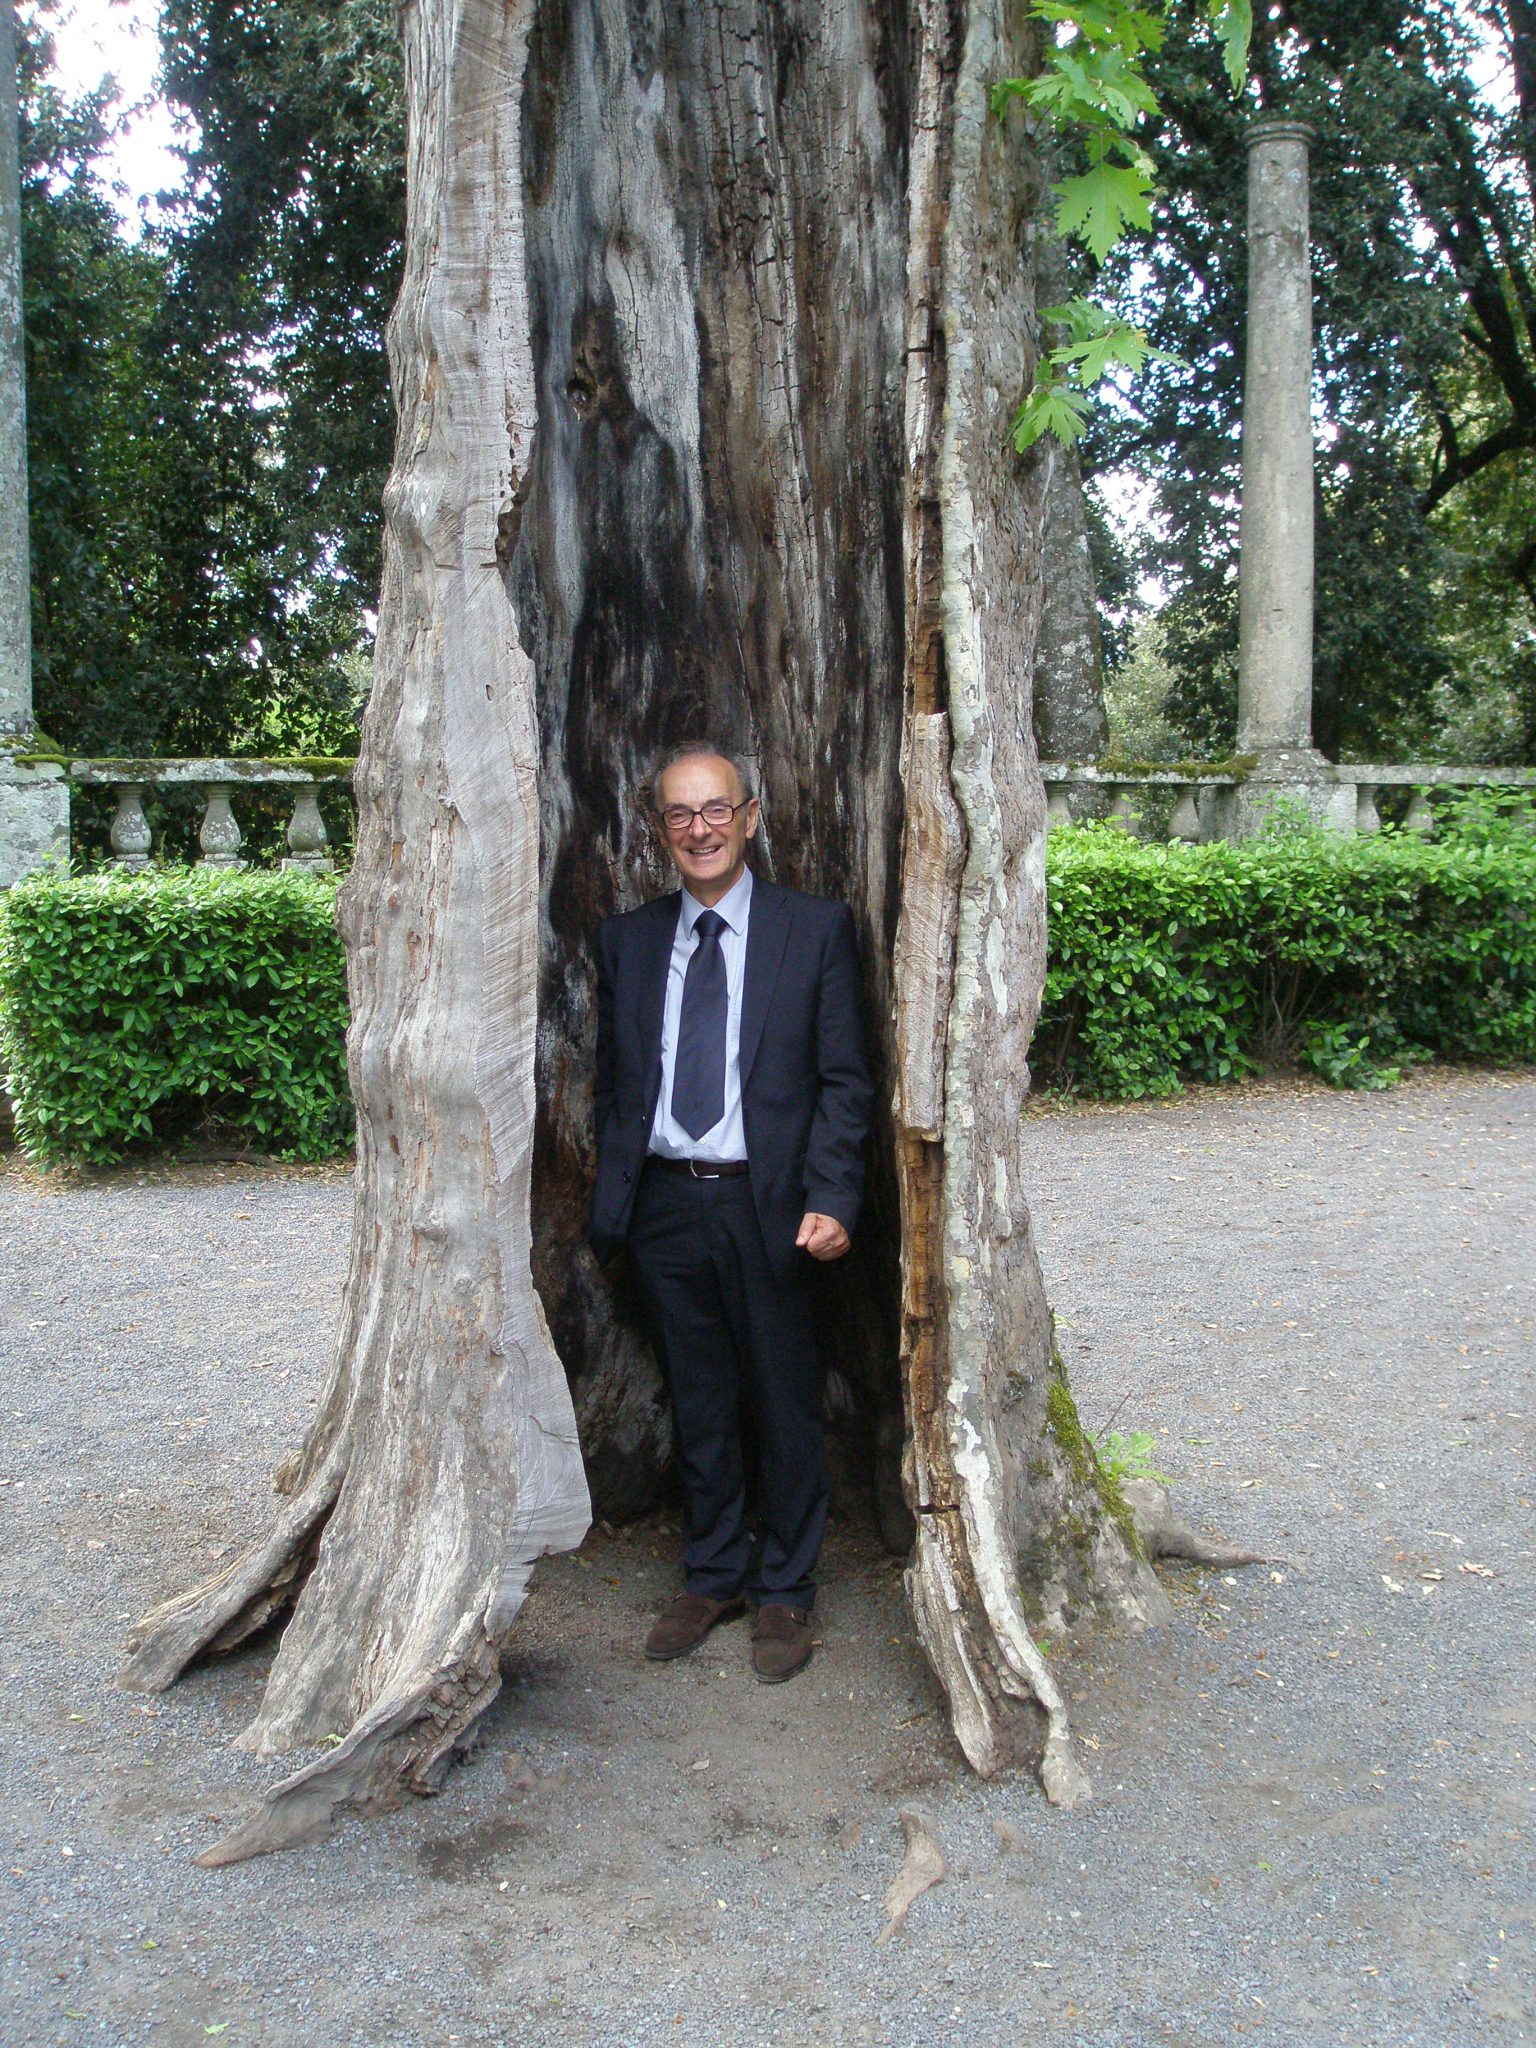 Our charming driver Anacleto: inside a hollow tree at the Fountain of the Deluge, in the gardens of Villa Lante, Bagnaia.